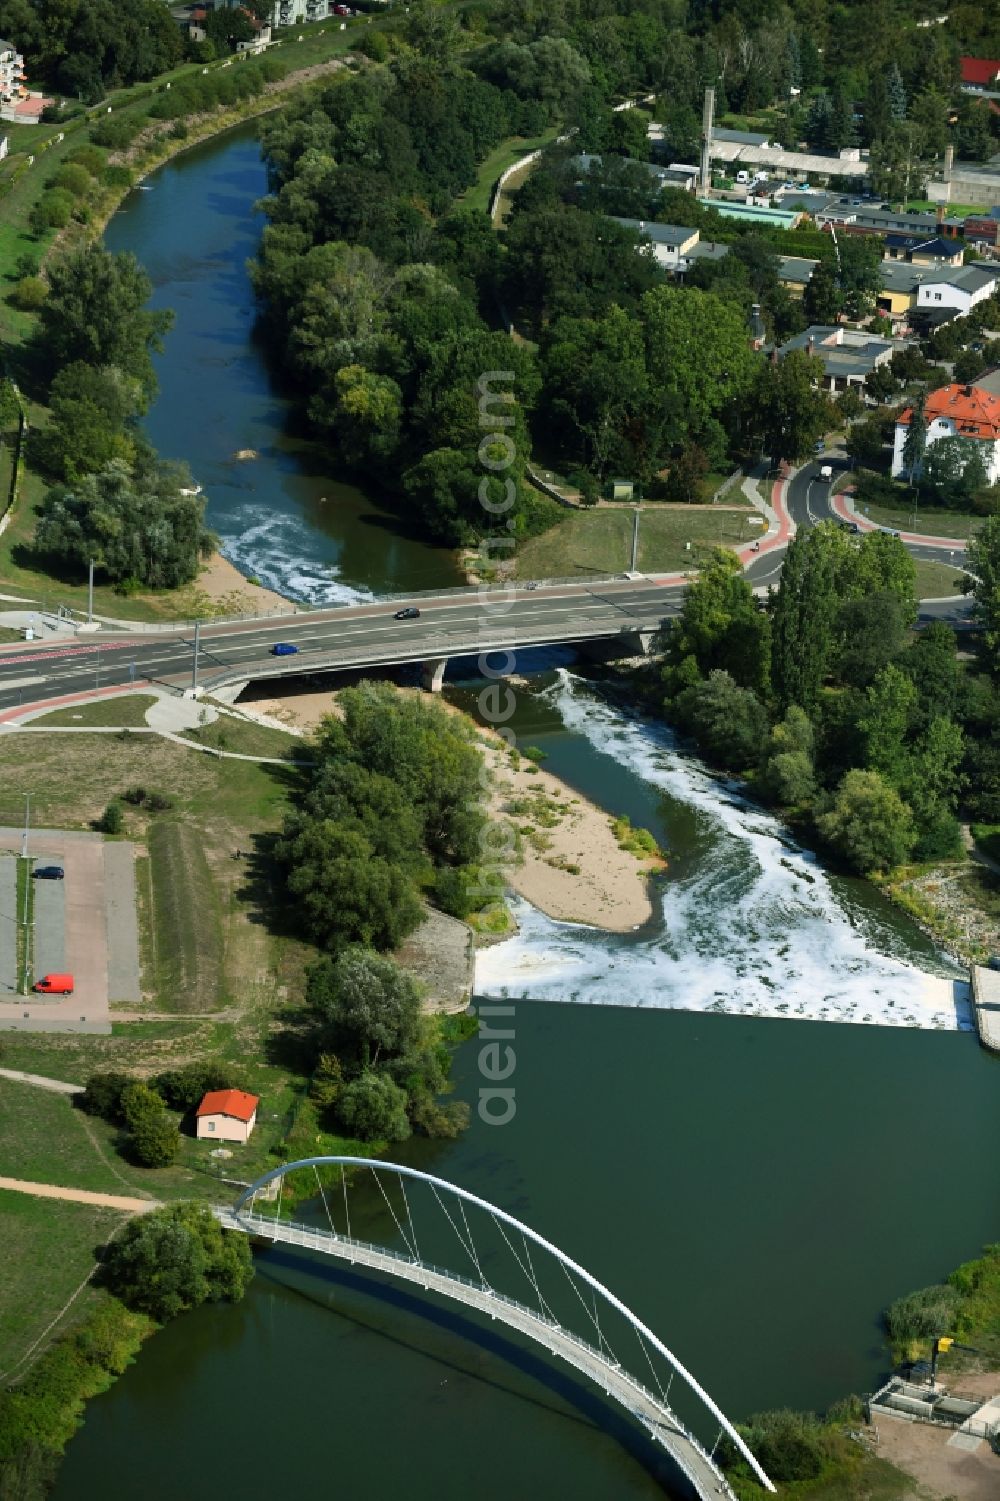 Dessau from the bird's eye view: Weir on the banks of the flux flow Mulde in Dessau in the state Saxony-Anhalt, Germany